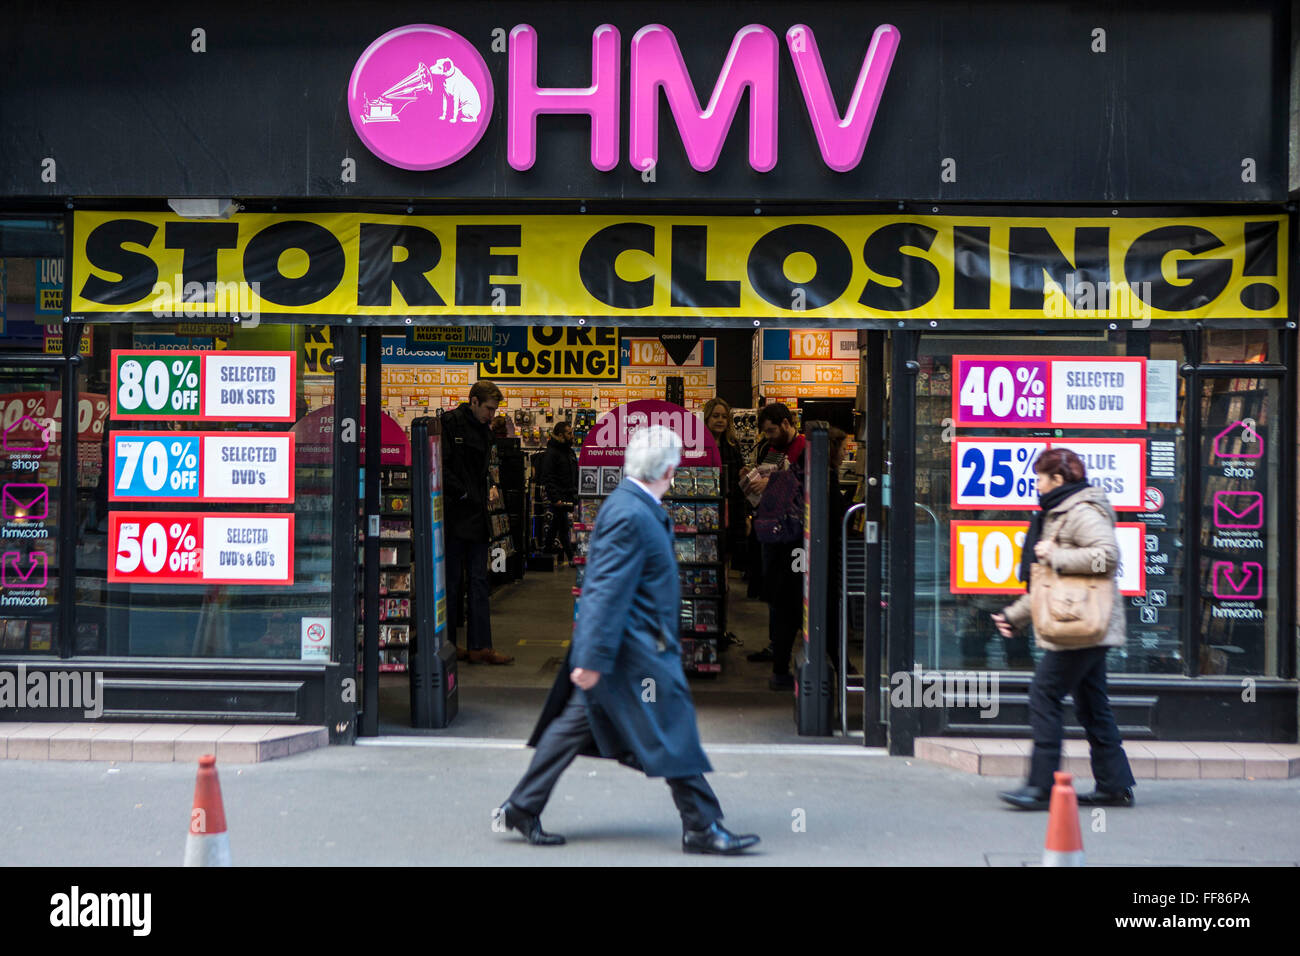 A British city worker walks past an HMV entertainment retail store in the Square Mile, central London, United Kingdom.  The shop is having a closing down sale and due to the economic downturn the British retailing company entered administration in January 2013. Stock Photo